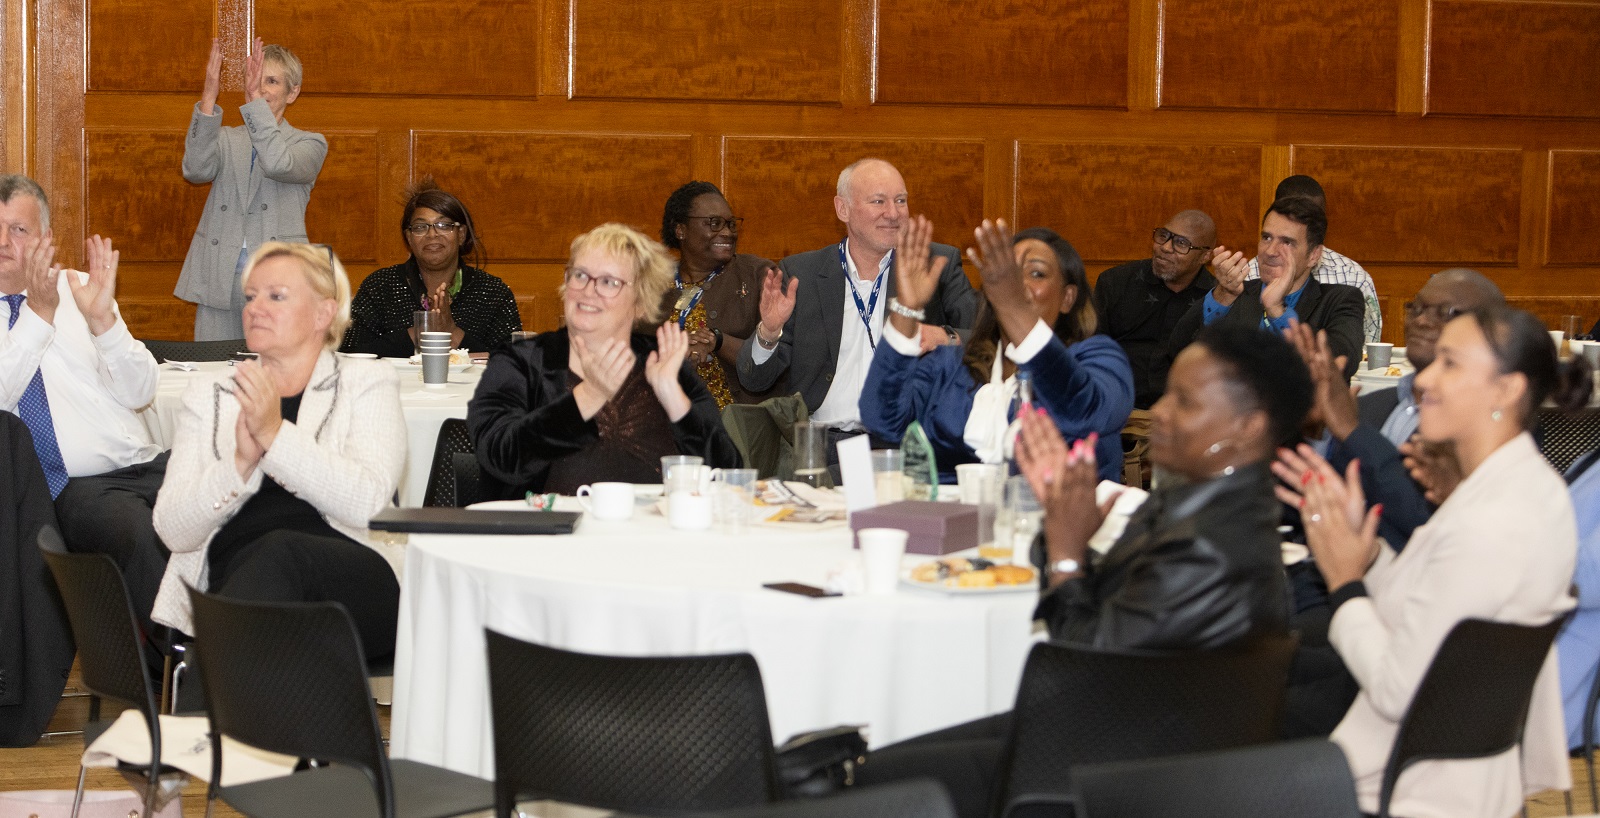 Carers awards 2023 photo by John Spaull - table of Lambeth officials, Cabinet Members, Directors applauding